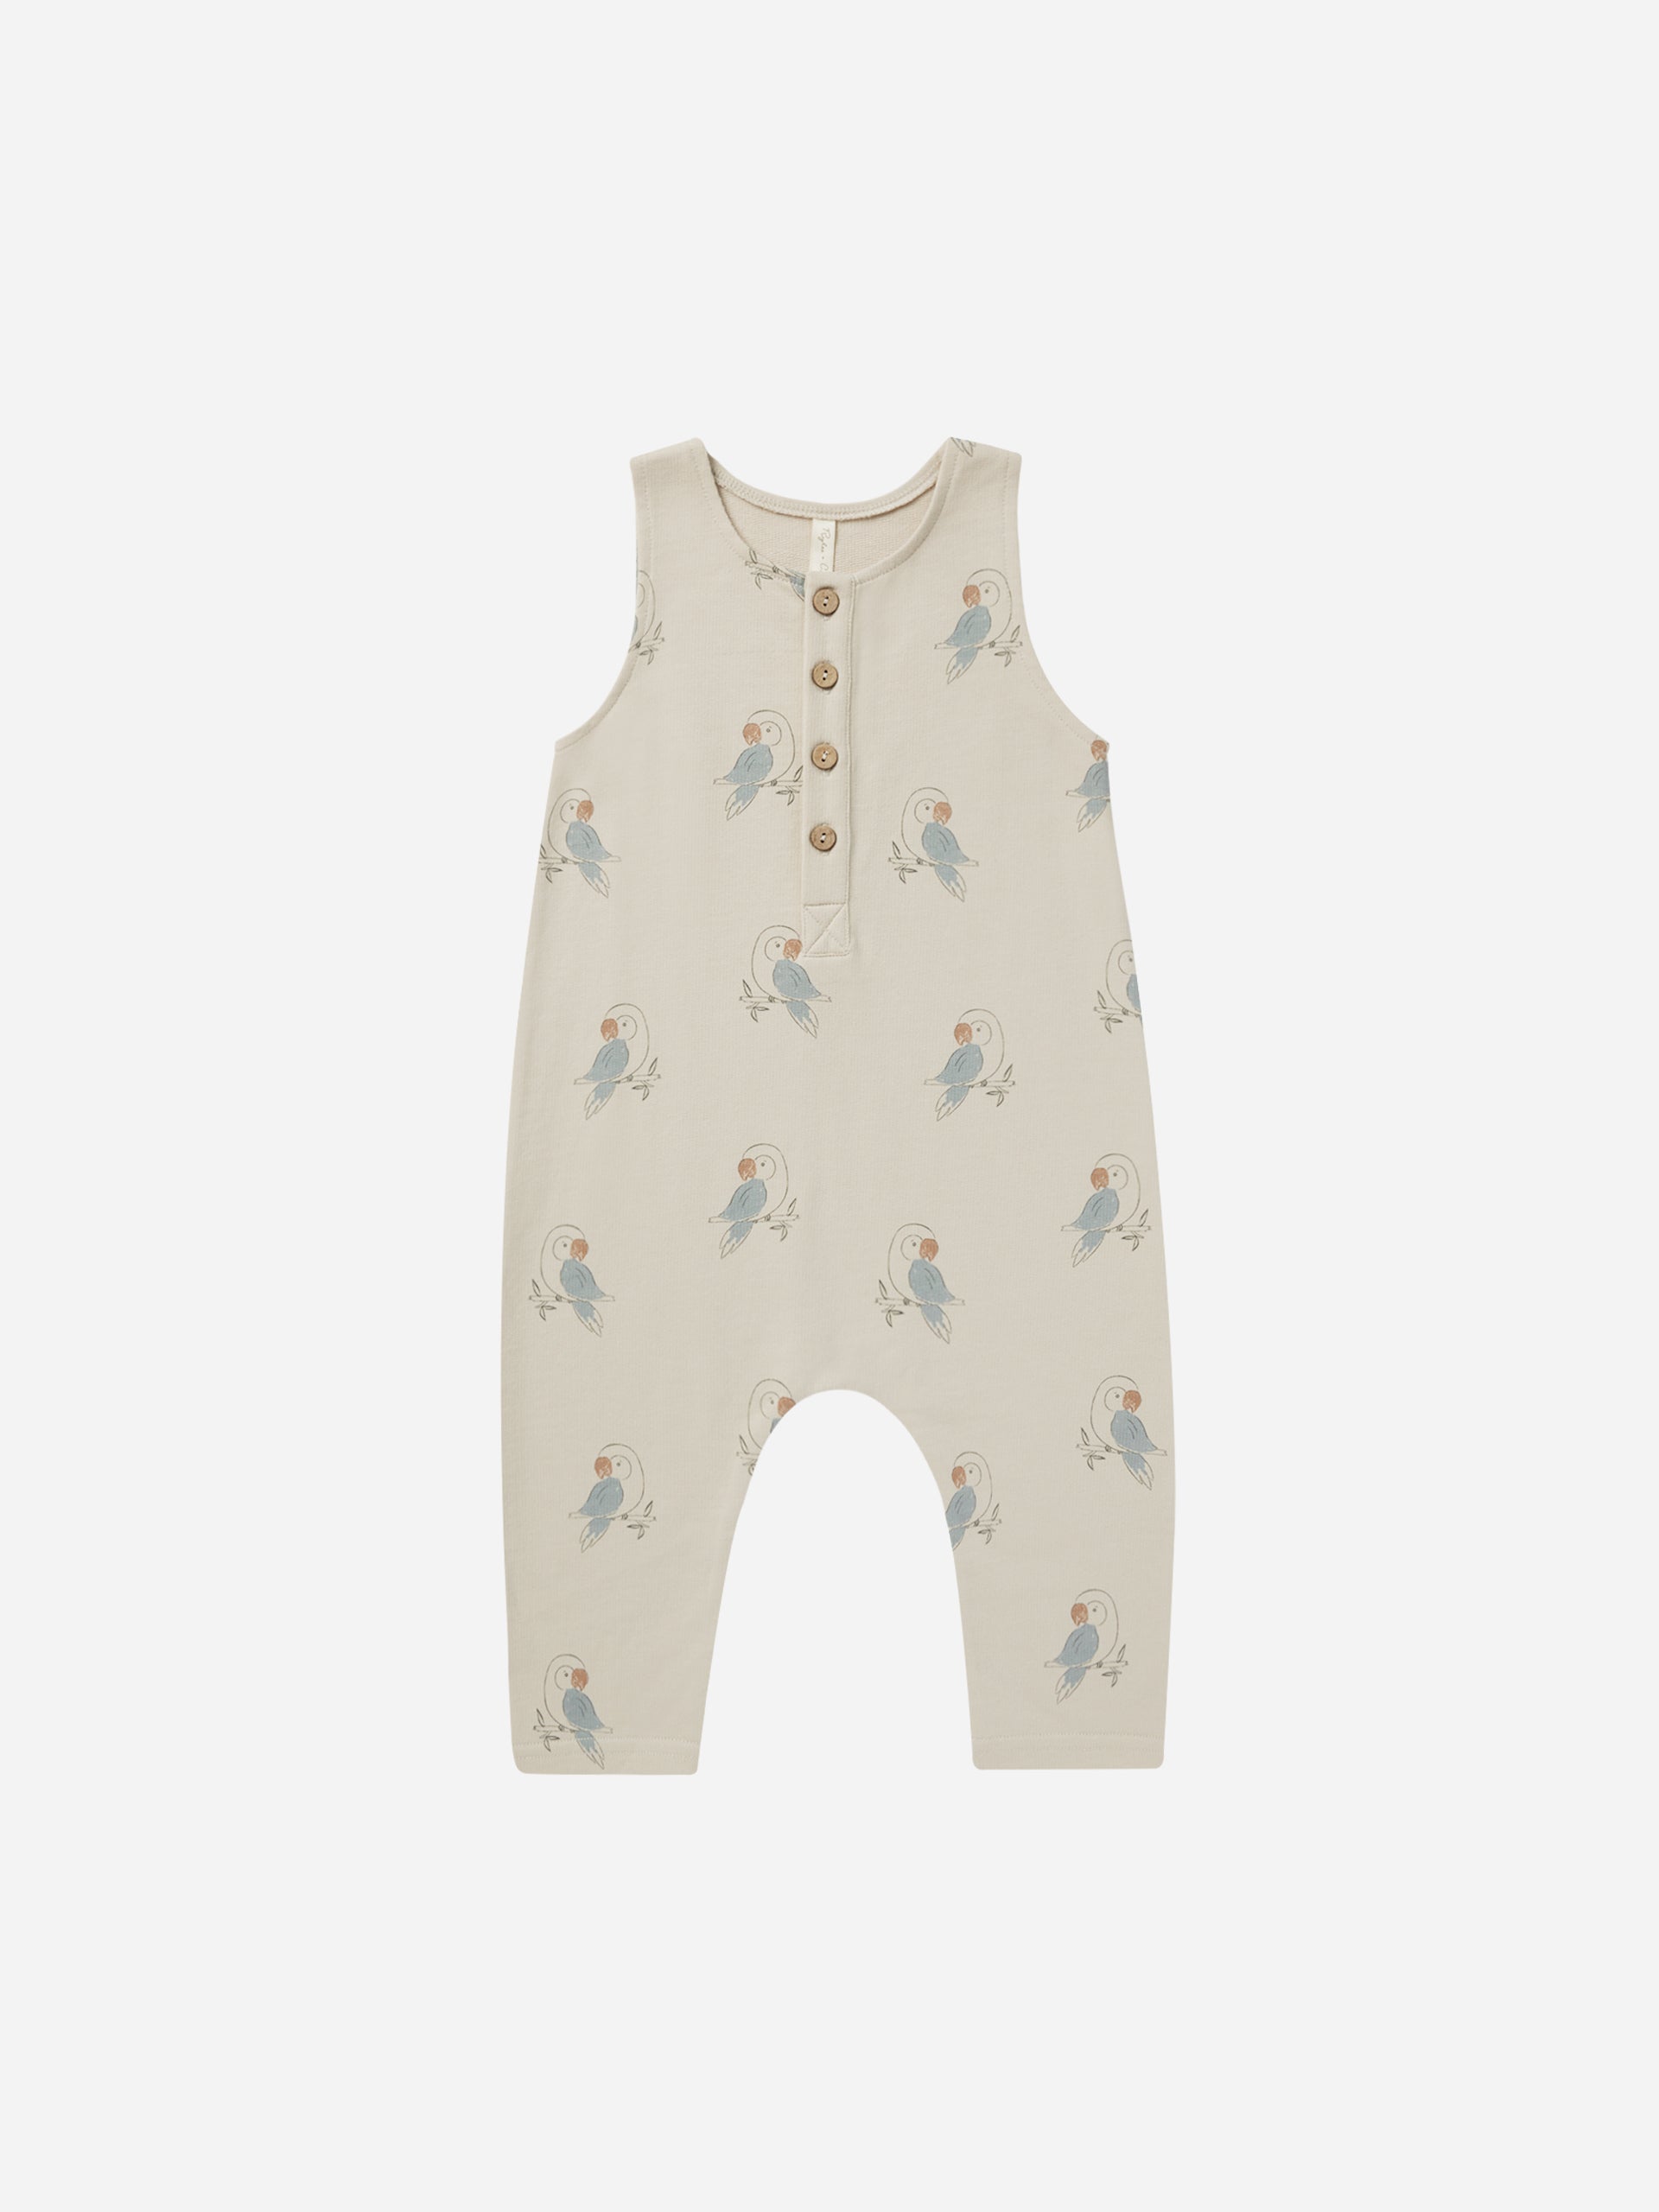 Terry Jumpsuit || Parrots - Rylee + Cru | Kids Clothes | Trendy Baby Clothes | Modern Infant Outfits |